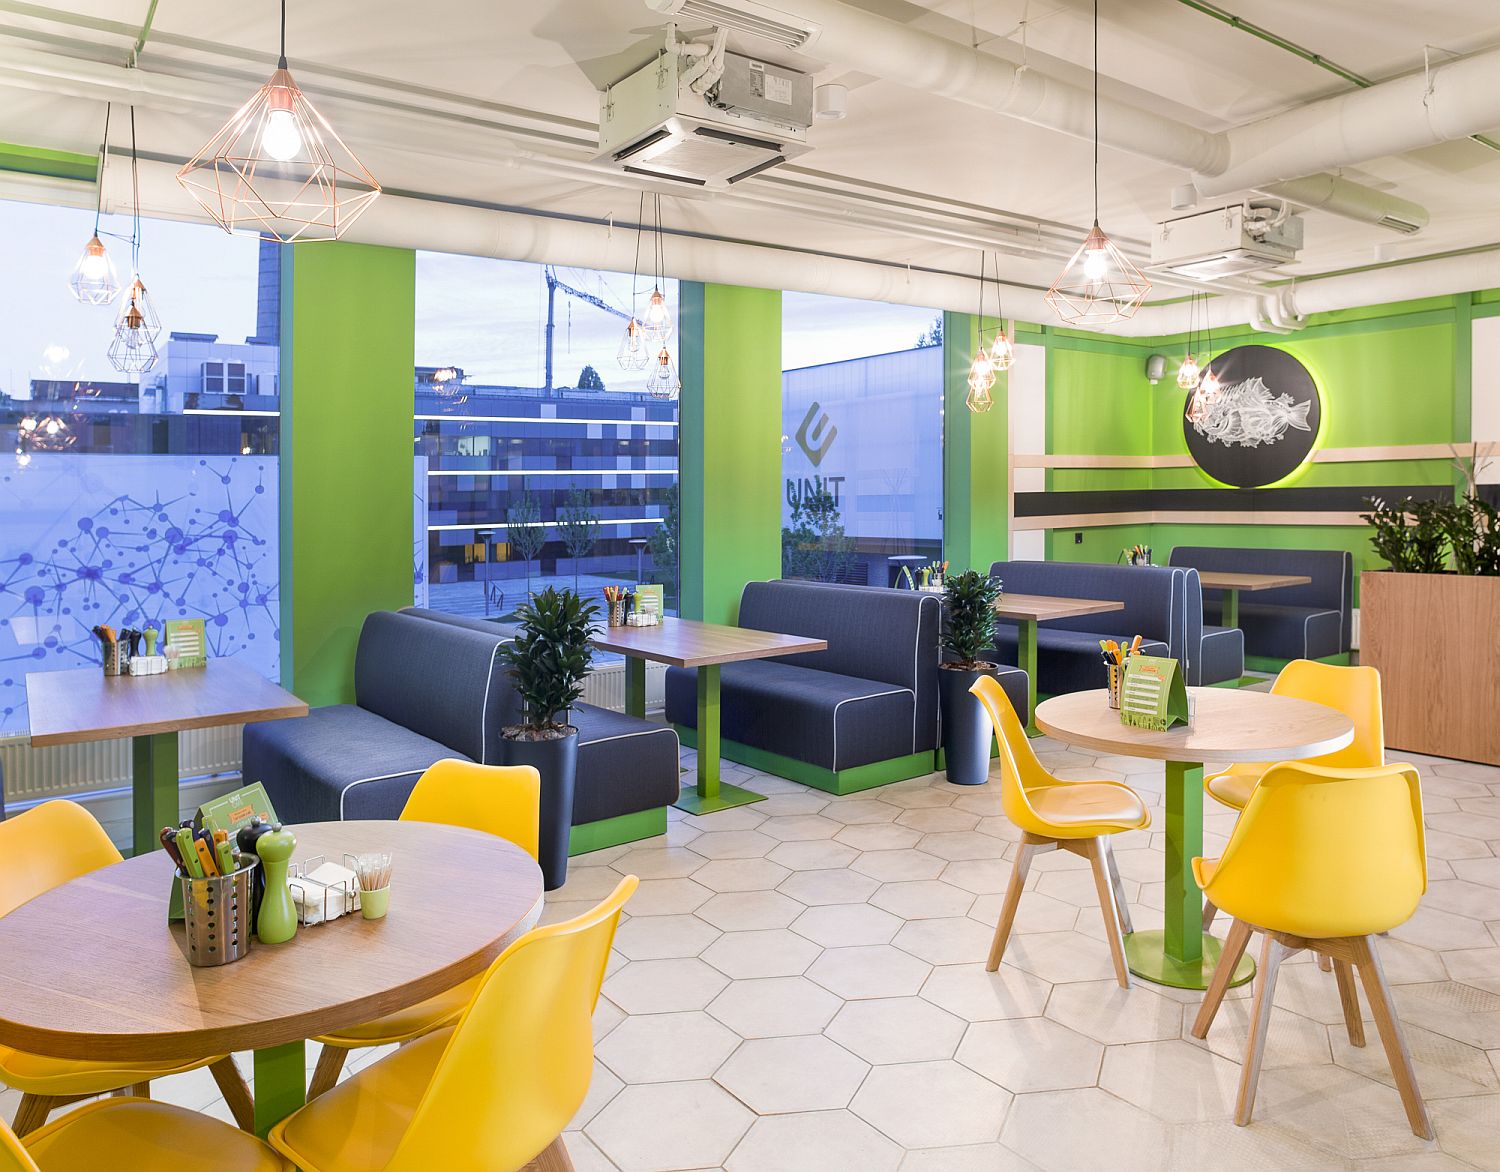 Interior-with-green-and-pops-of-yellow-with-hexagonal-tiled-flooring-and-geo-accents